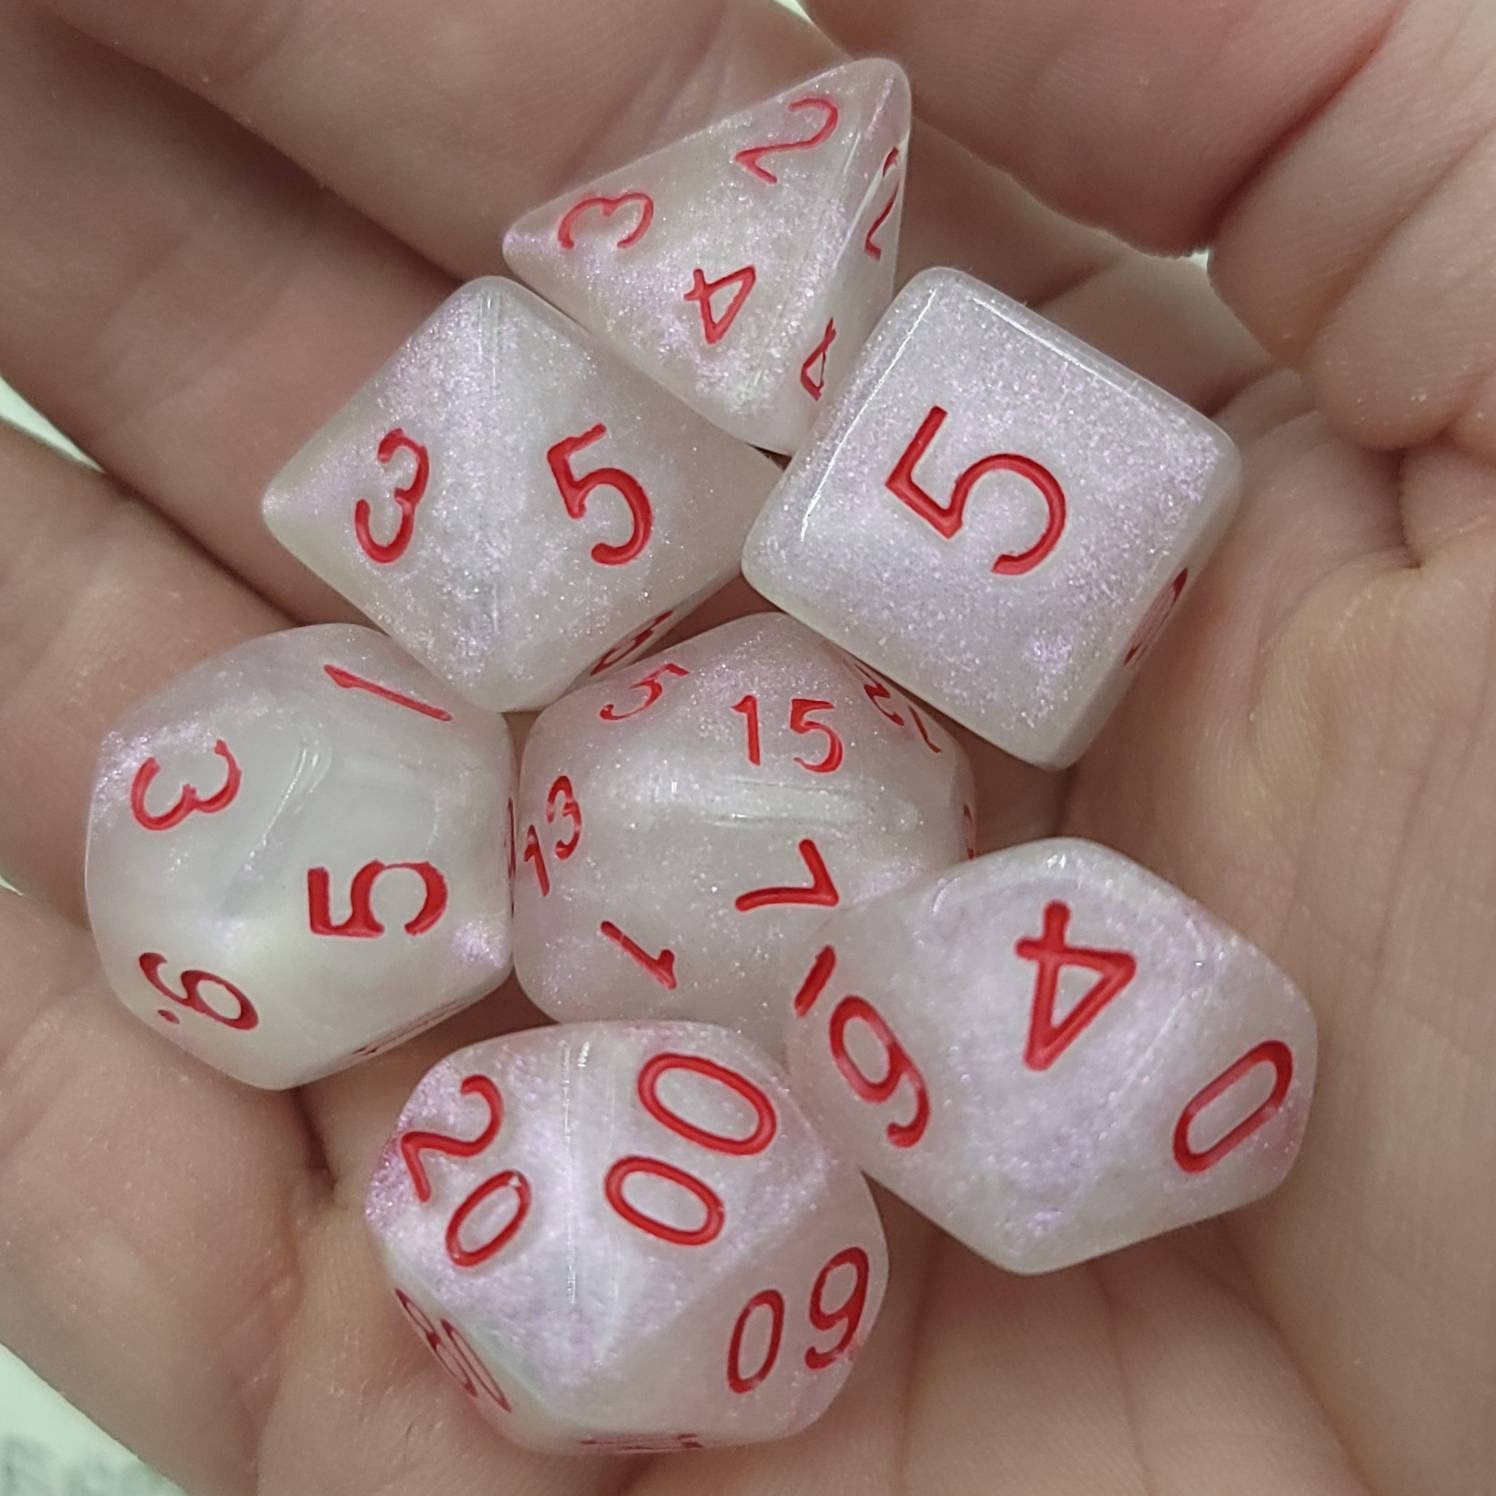 Fairy Dust | RPG Dice Set| RPG Dice | Polyhedral Dice Set | Dungeons and Dragons | DnD Dice Set | Gaming Dice Set